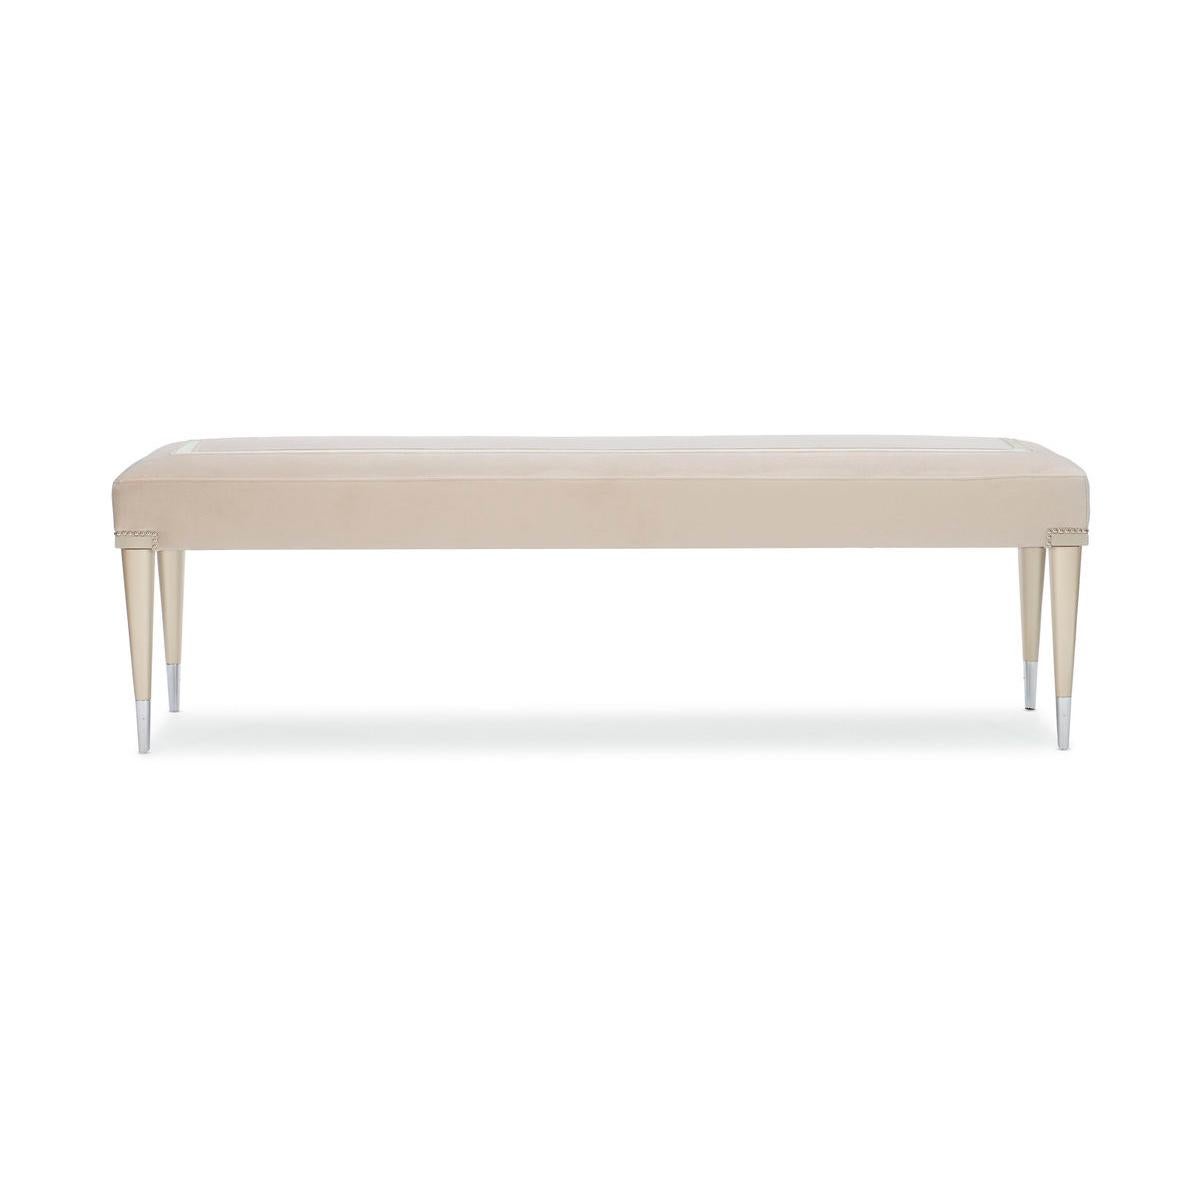 It’s easy to enhance any space with the addition of this finely tailored bench. Sumptuously upholstered with performance fabric, it features a Soft Silver Paint finish on its legs highlighted by metal ferrules in Stainless Steel. With classic lines